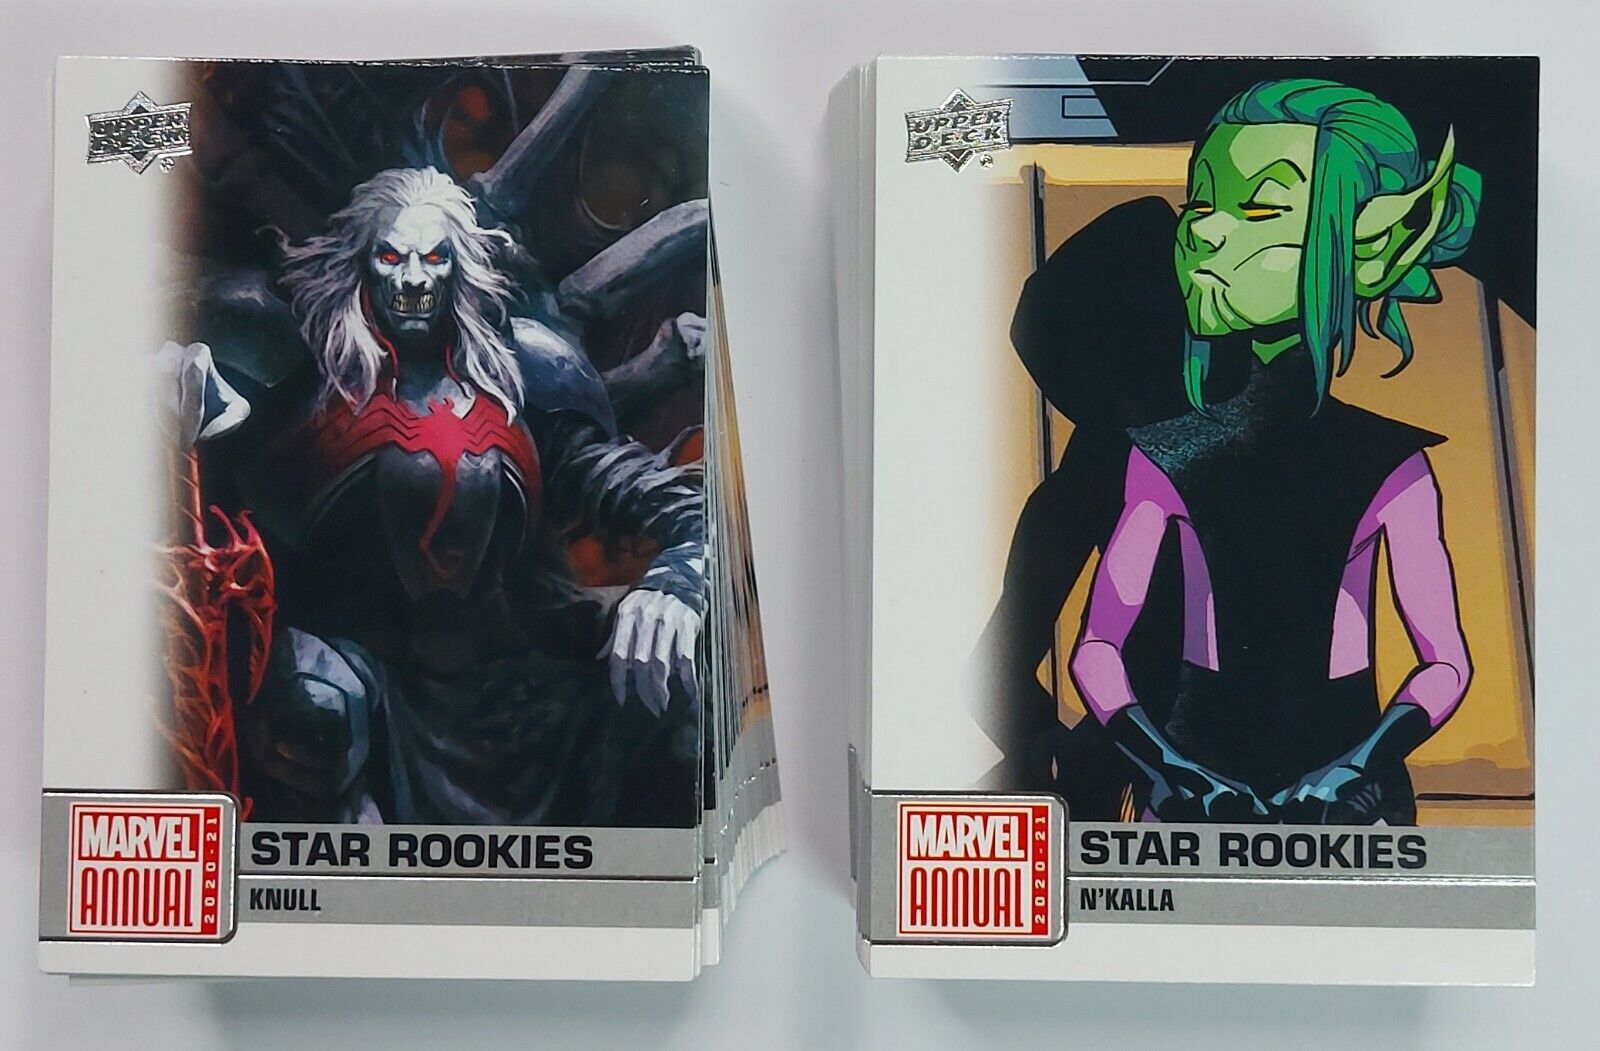 2020-21 Upper Deck Marvel Annual STAR ROOKIES Inserts (Pick Your Own) 1:10